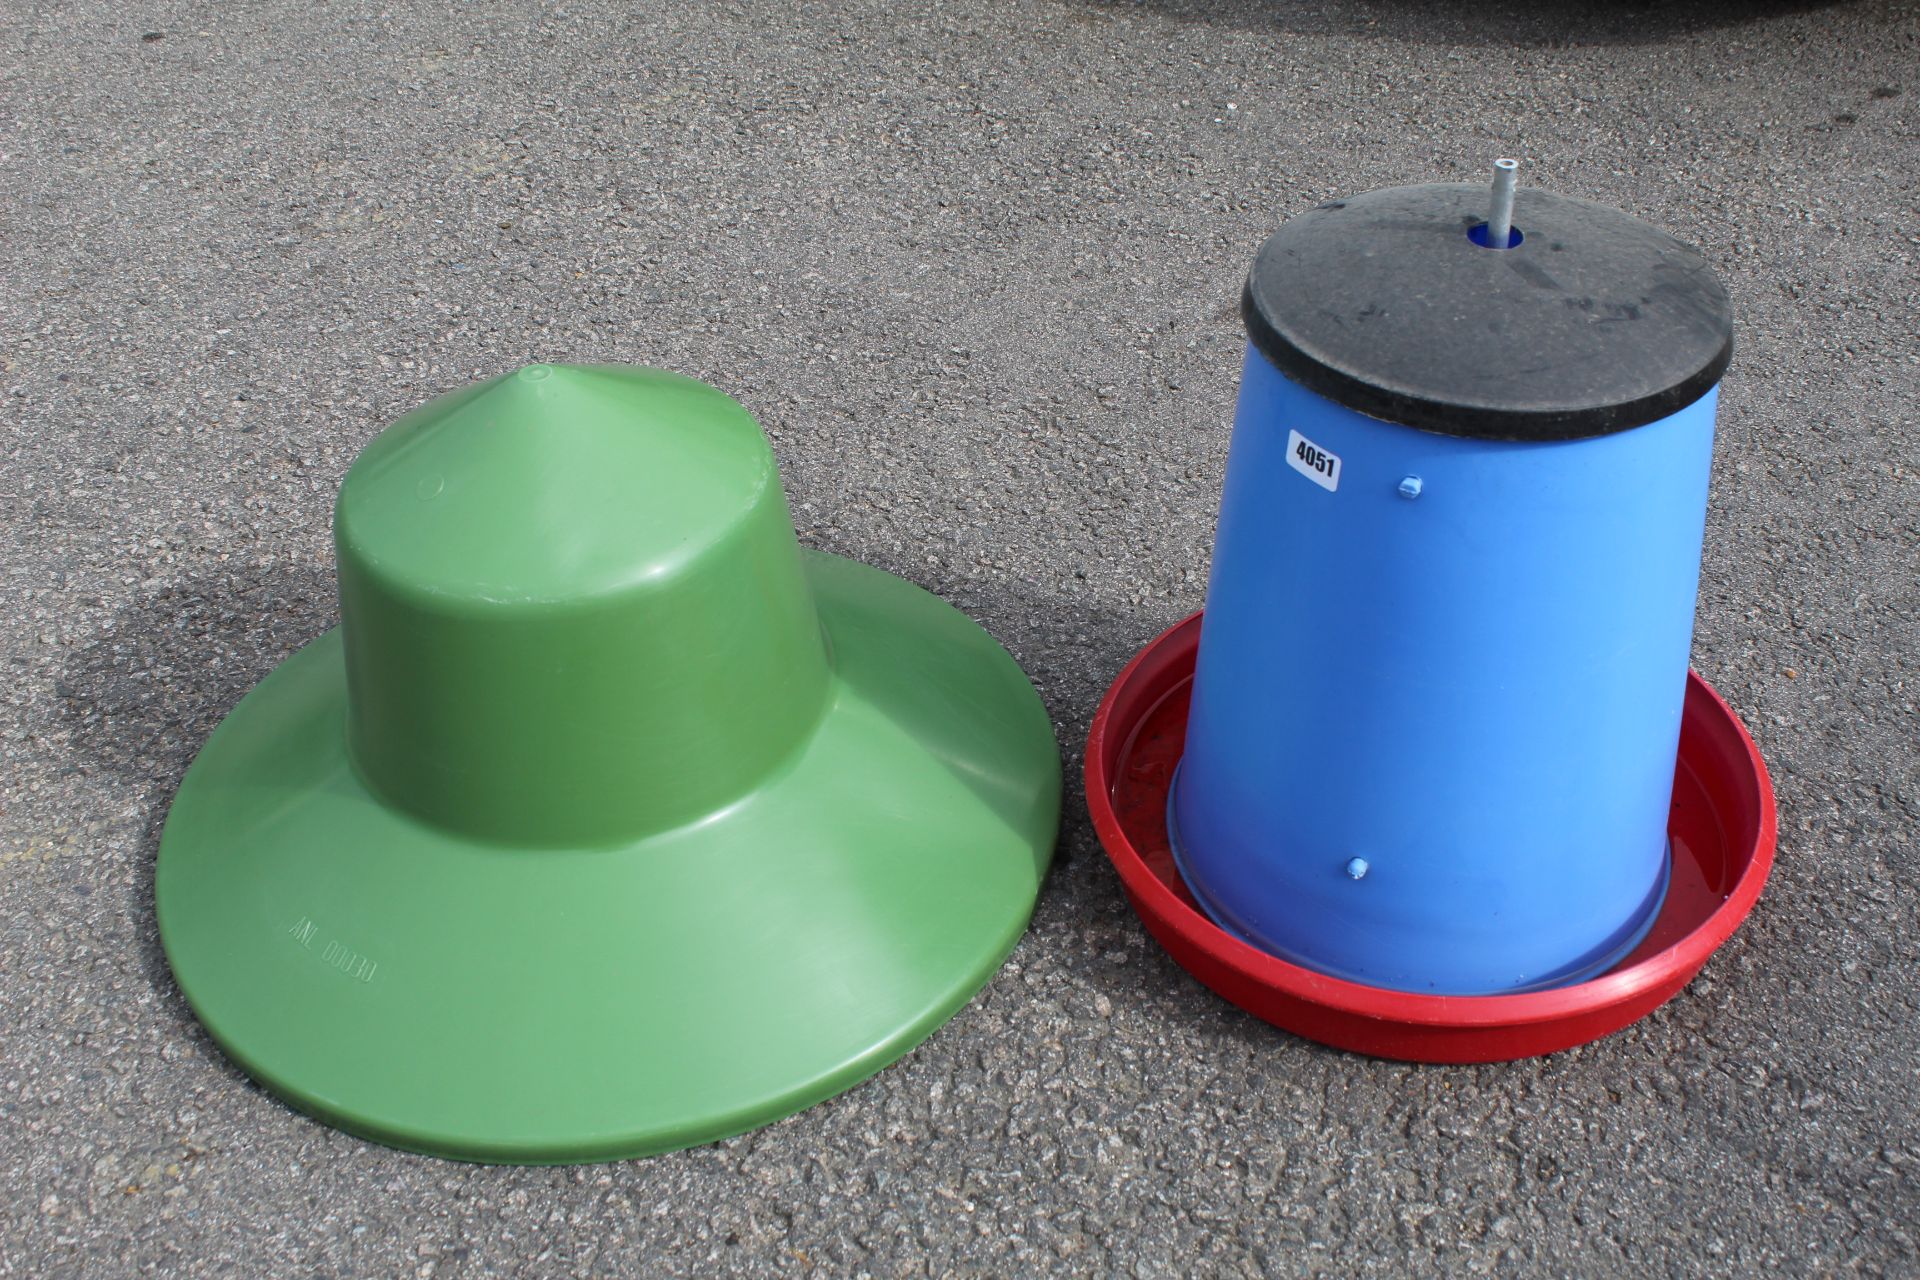 11 x Manola Feeder Outdoor feeders with green top hat covers by Quill Productions - Image 2 of 2